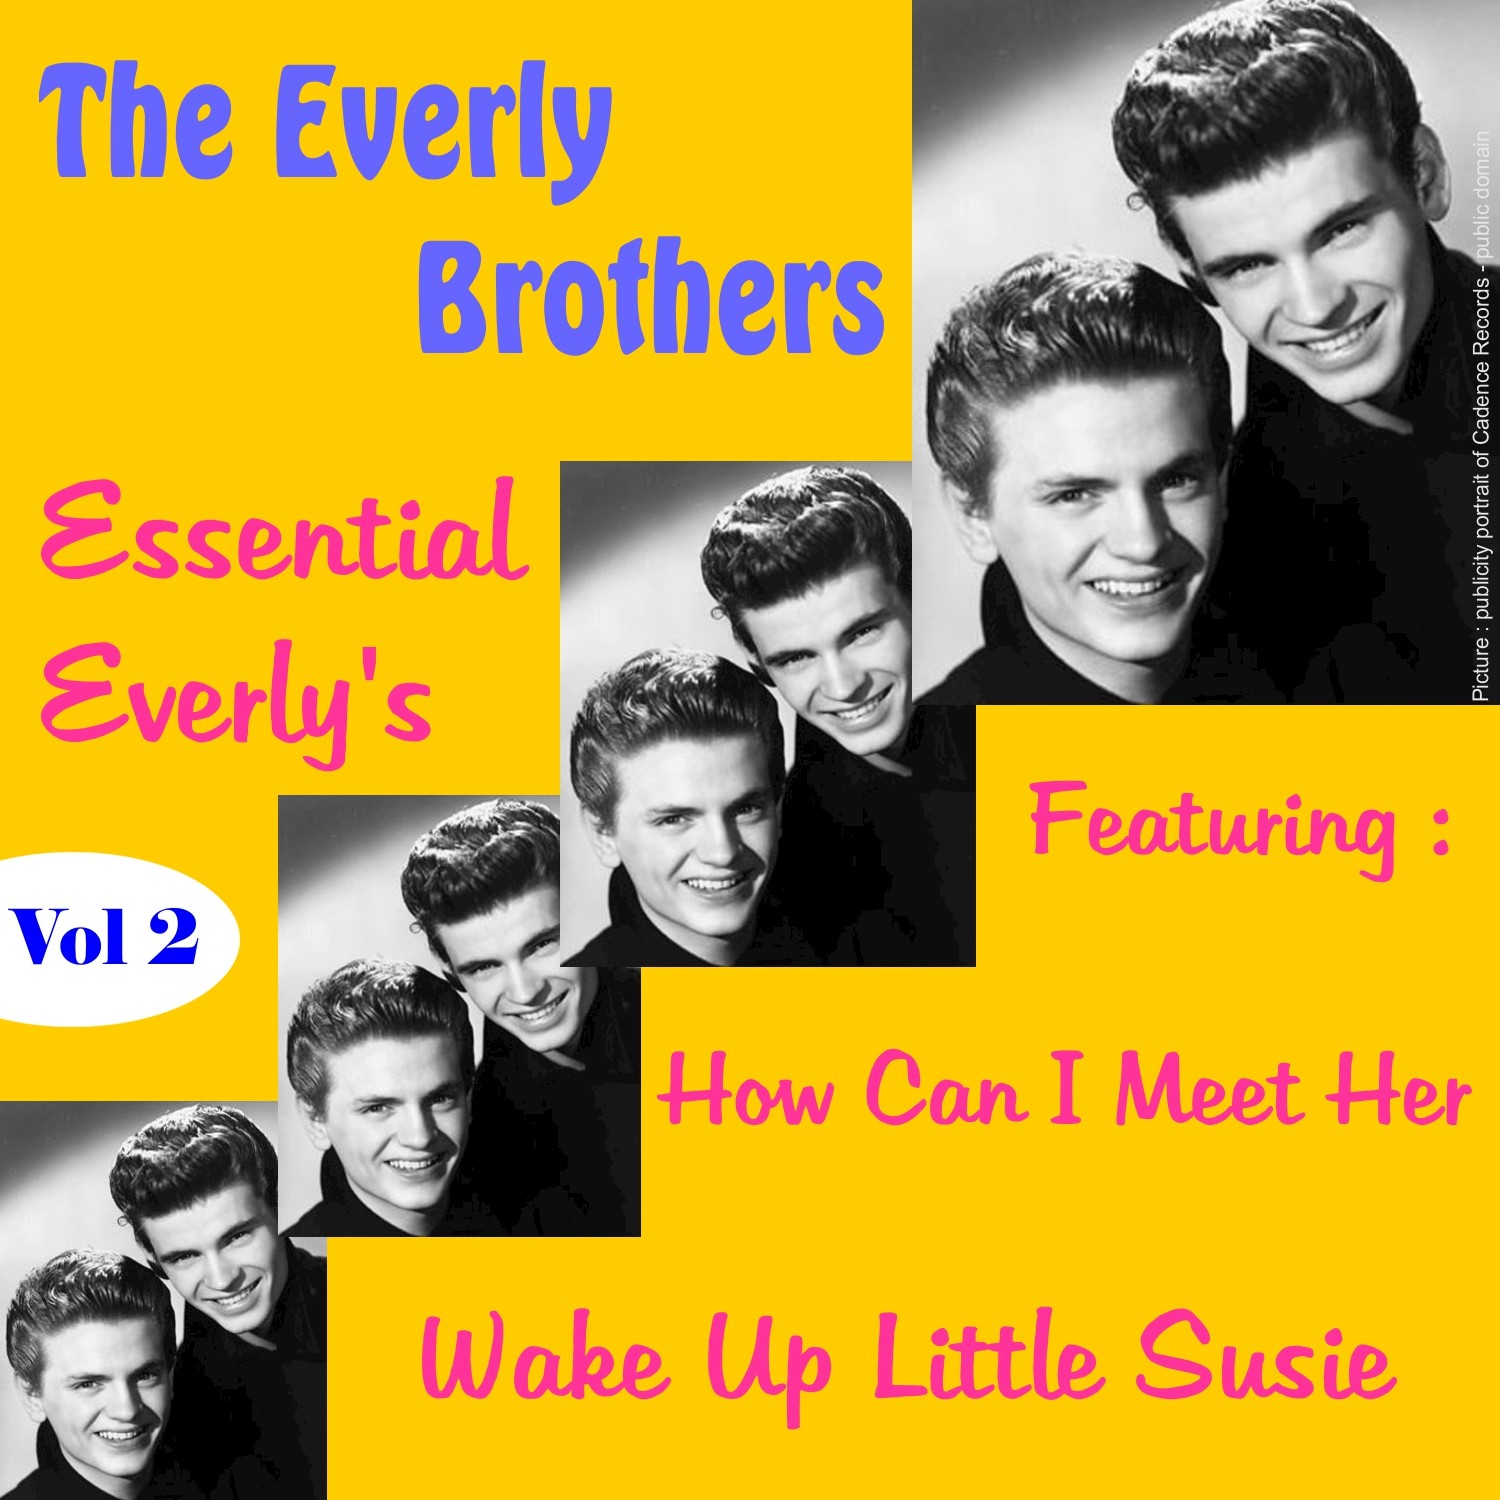 Essential Everly's, Vol. 2